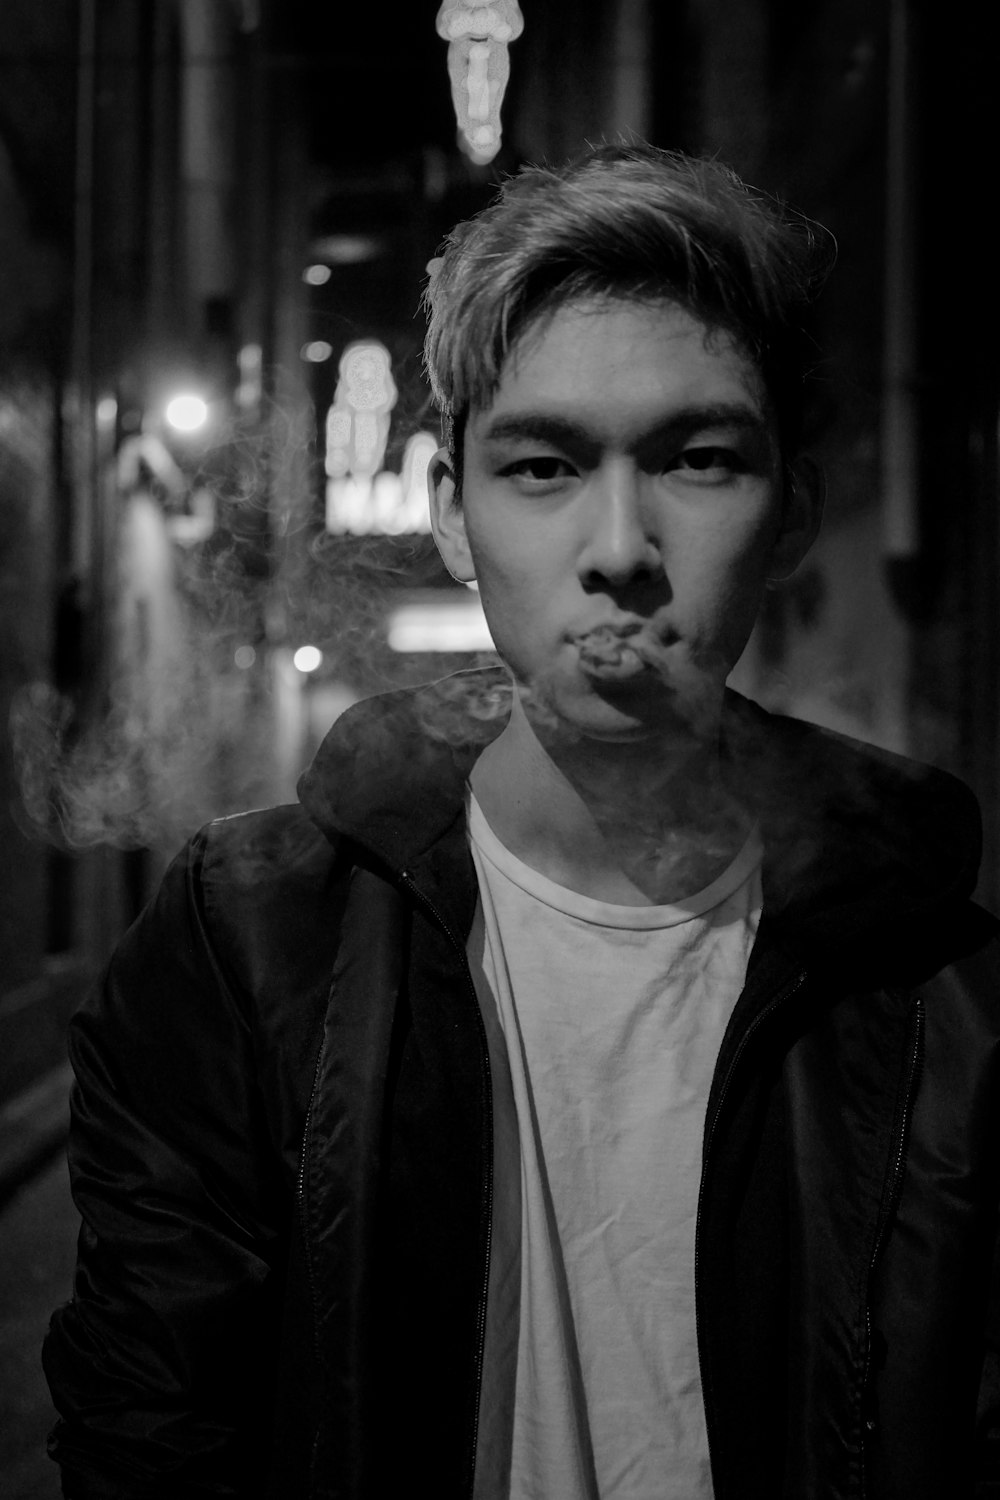 man in black jacket and white top smoking cigarette